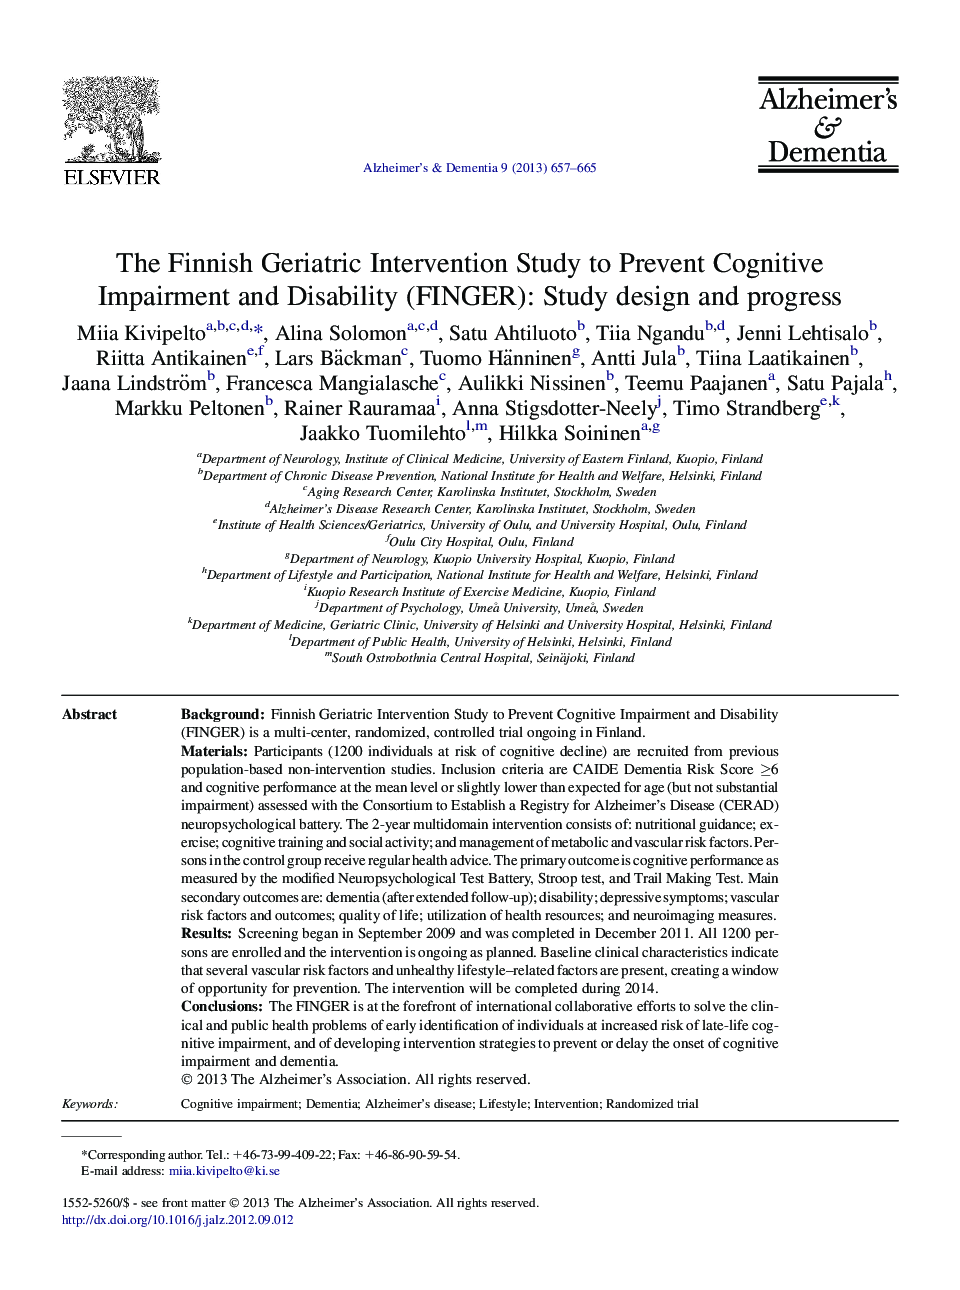 Featured ArticleThe Finnish Geriatric Intervention Study to Prevent Cognitive Impairment and Disability (FINGER): Study design and progress